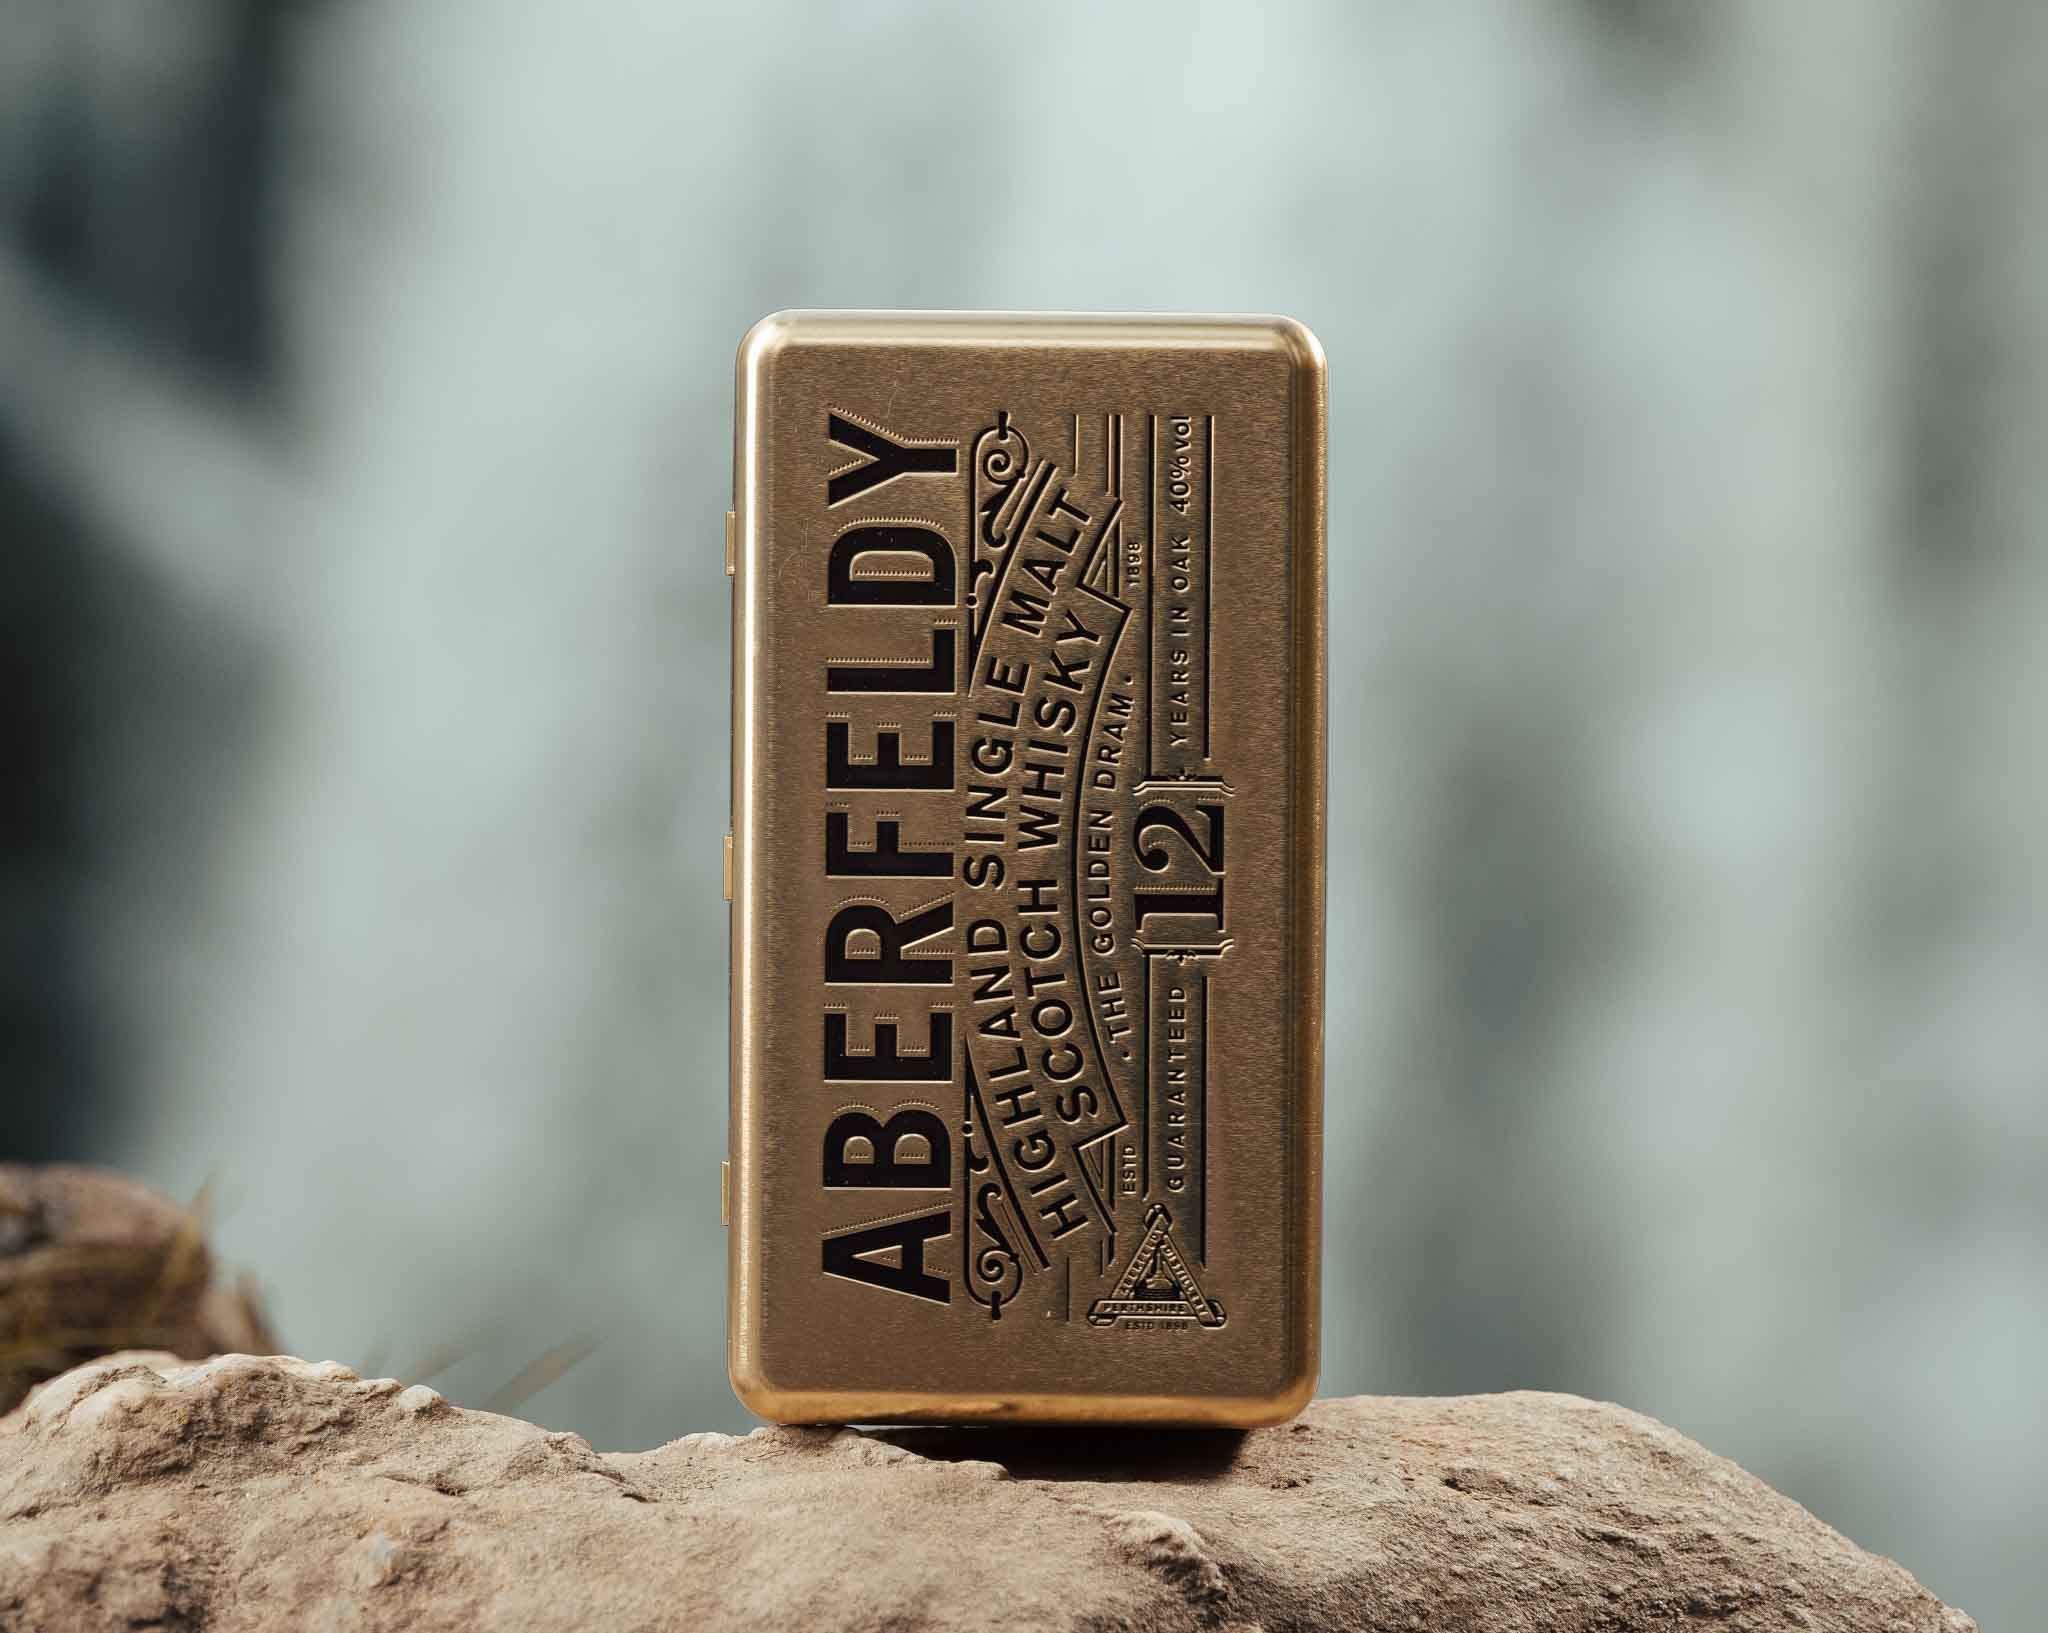 Aberfeldy 12 Year Old Gold Bar Gift Pack: Buy Now